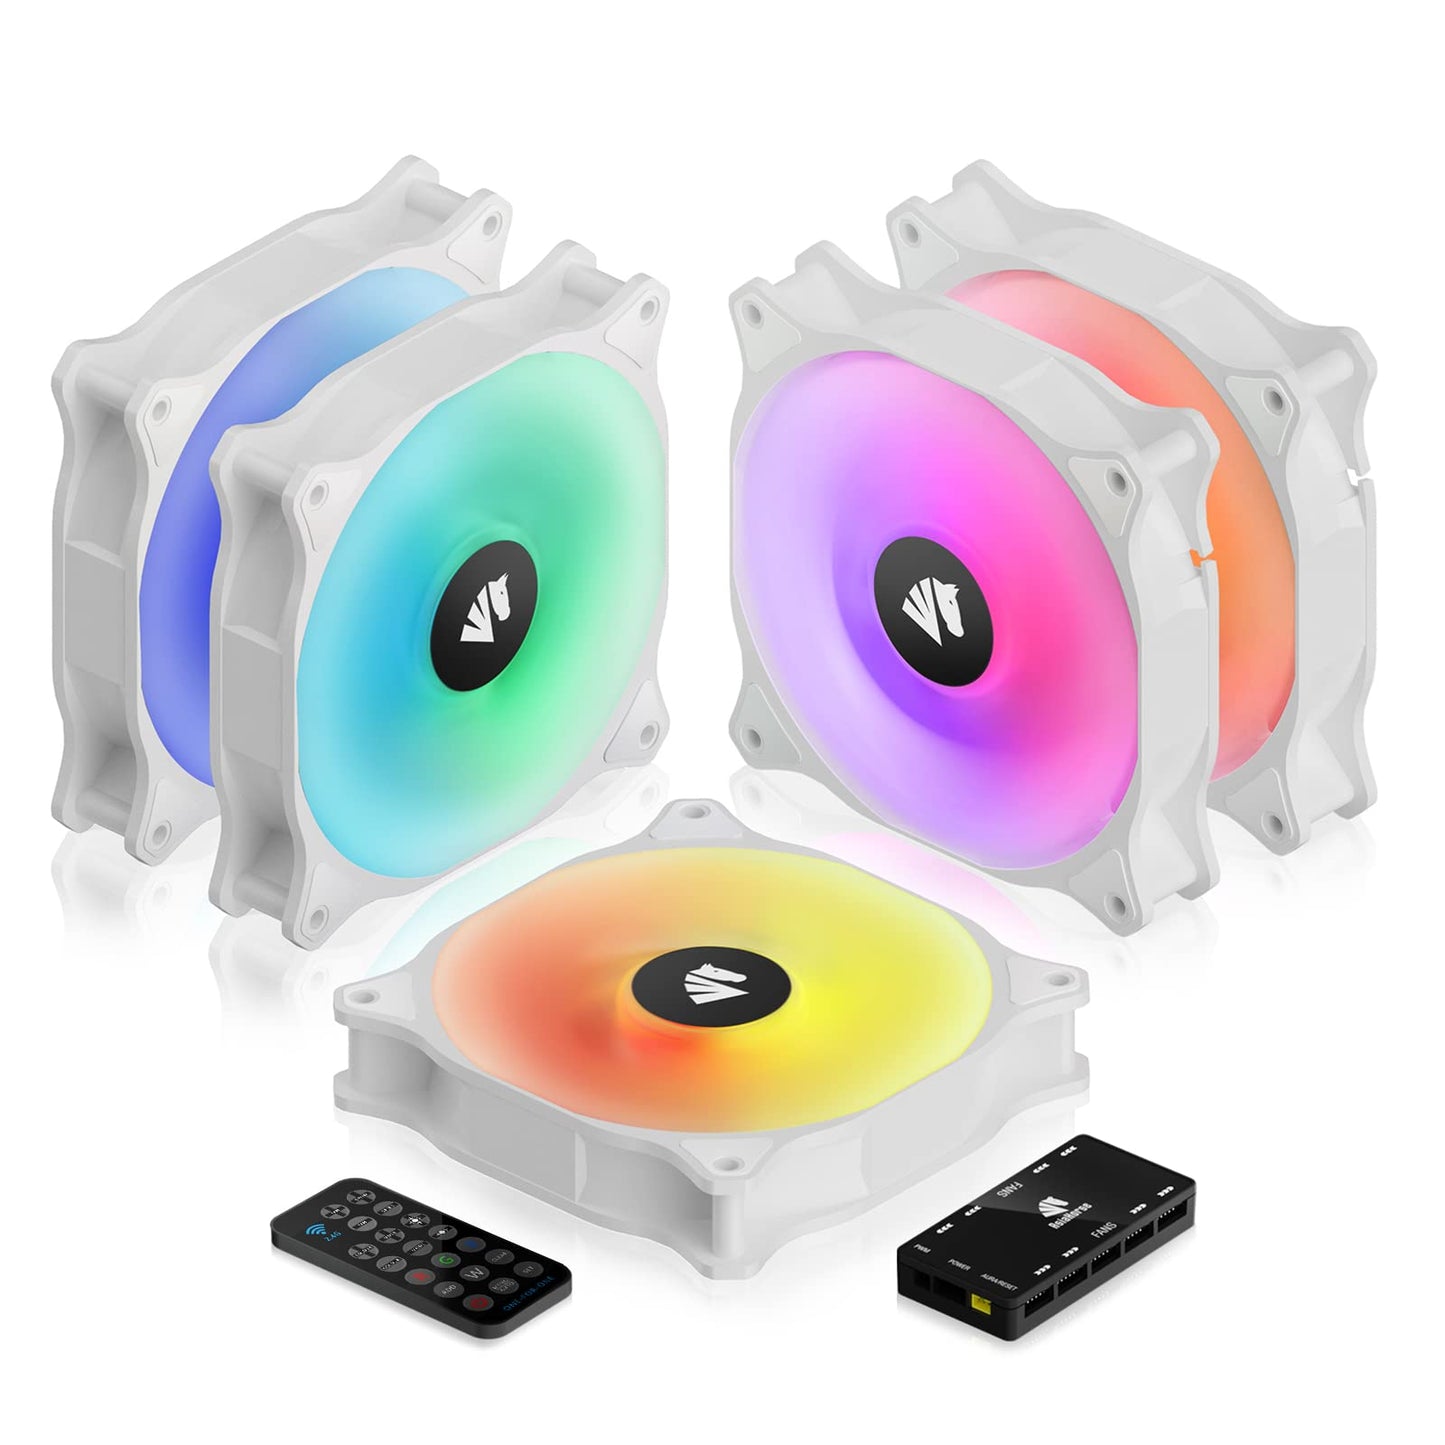 ASIAHORSE WD-001 Series 120mm Case Fan with Controller, White 5V ARGB Motherboard Computer Case Fans Quiet High Airflow Adjustable Light Effect Computer Cooling Fan, 5 Pack